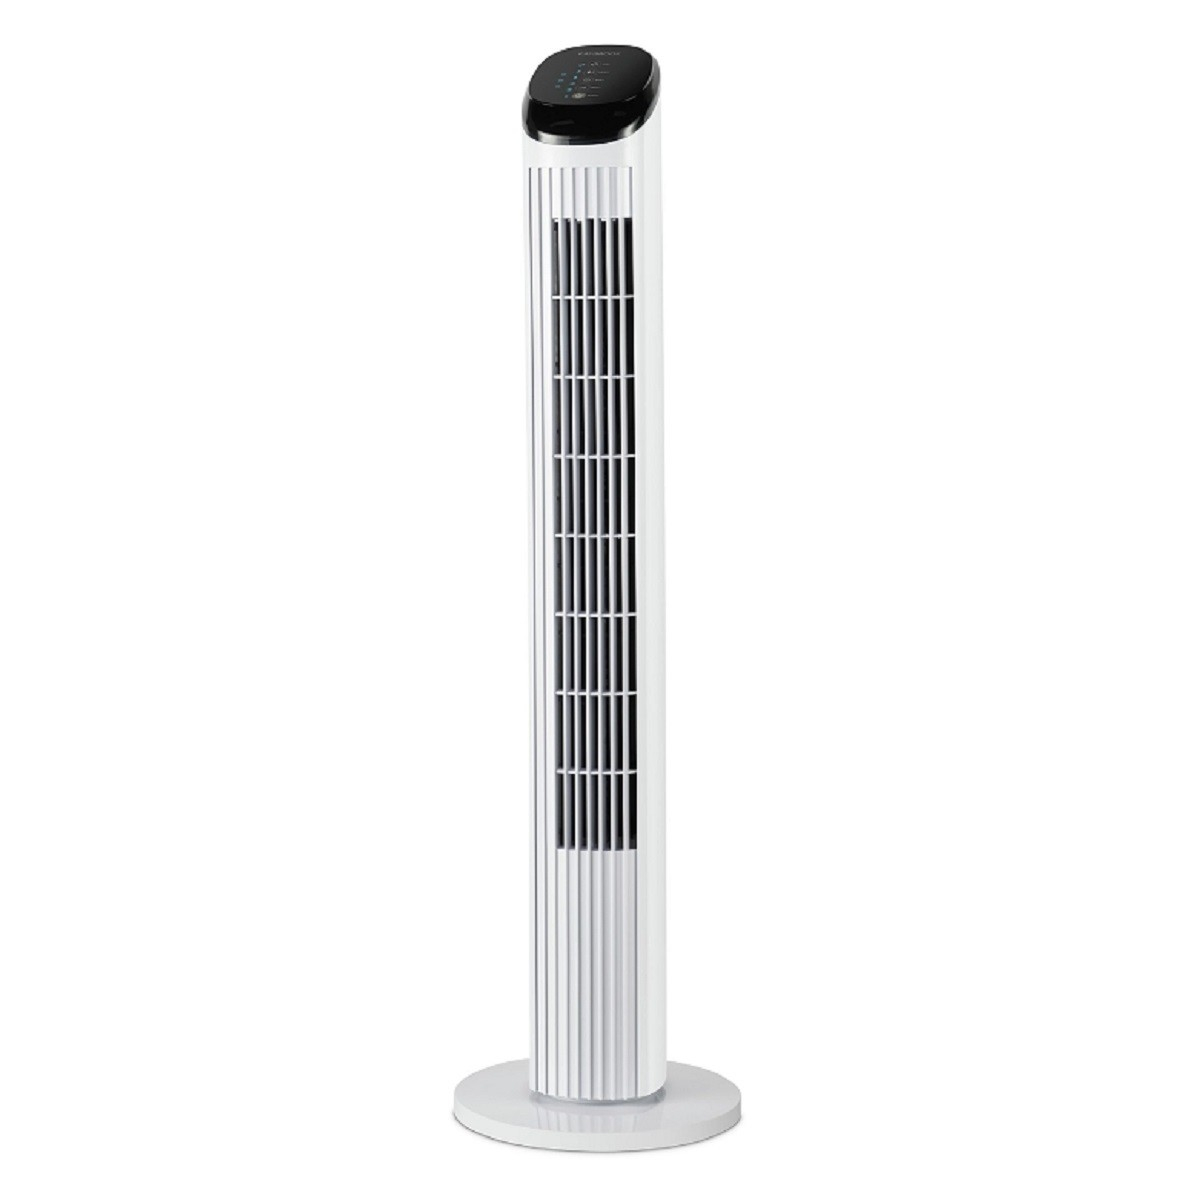 Kambrook 87cm Tower Fan Touch Display White Ktf840wht with dimensions 1200 X 1200